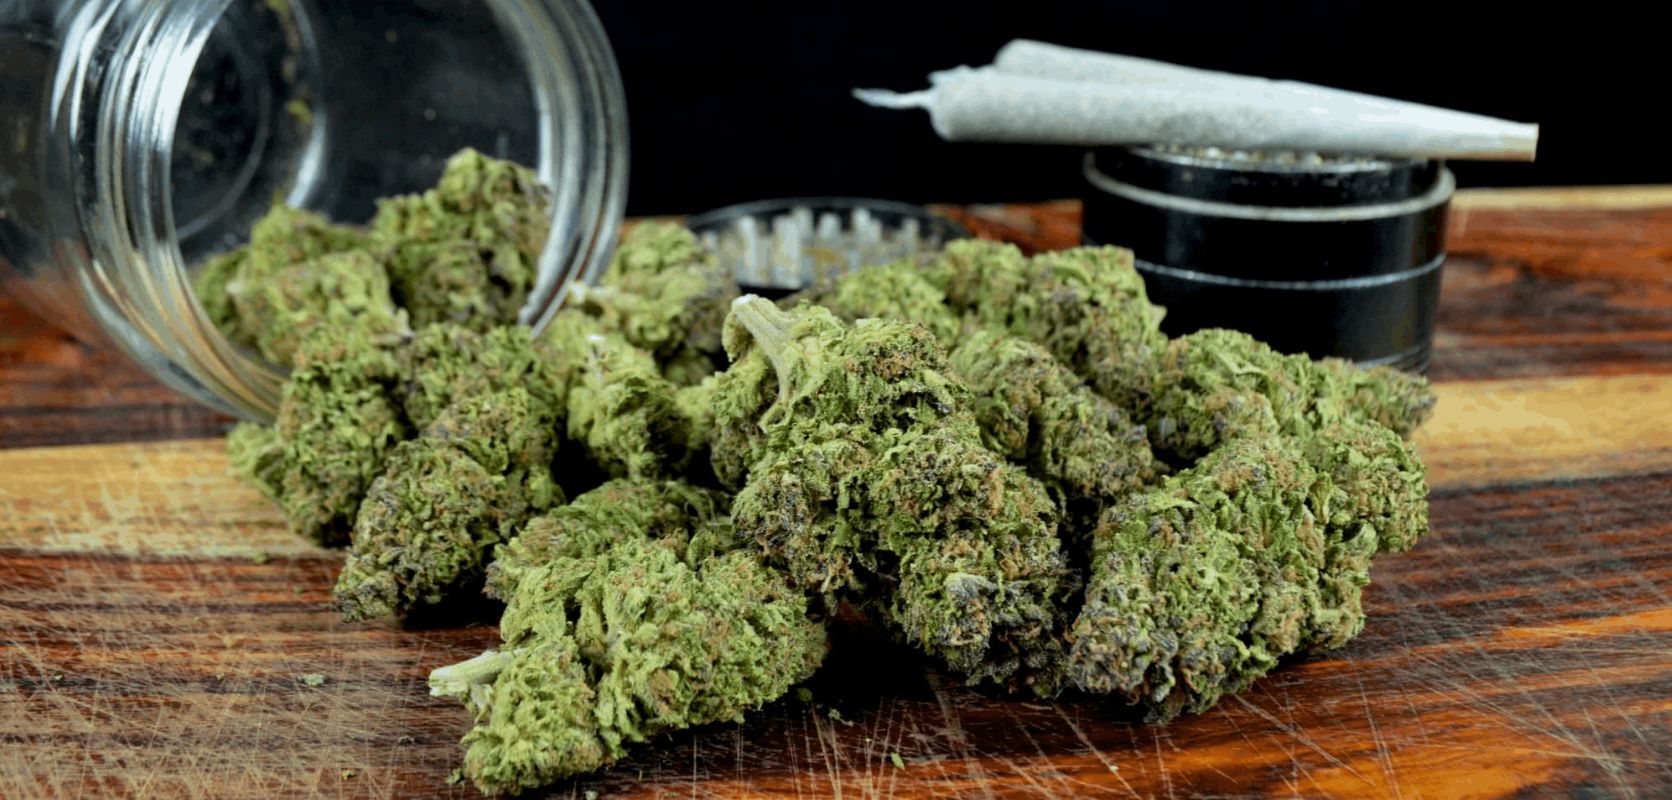 Wondering where you can get all the best weed deals in Canada? LowPriceBud is the leading online dispensary known for stocking high-quality weed at the lowest prices in the market, guaranteed. 